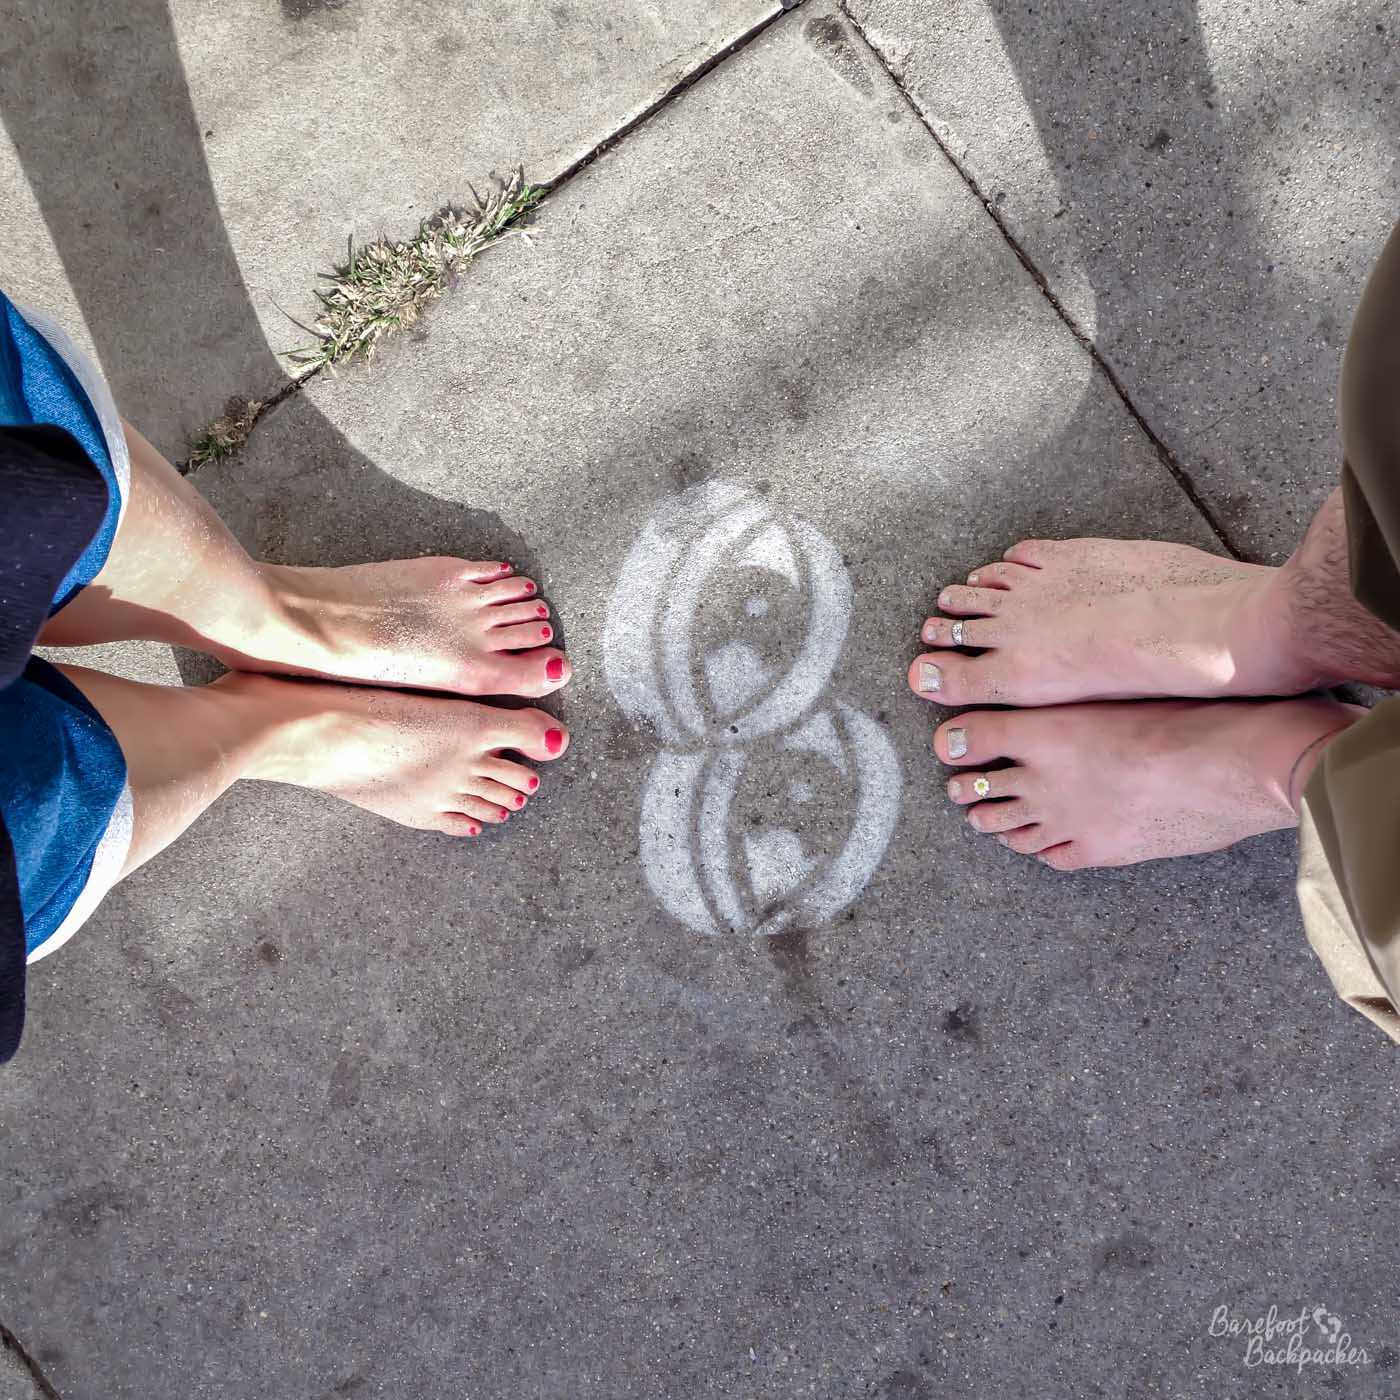 A shot from above looking down at the pavement. In the centre of the shot are a pair of eyes, drawn in white chalk. On either side of the eye art are a pair of feet, bare, the one on the left with red nail varnish, the one on the right with silver nail varnish.